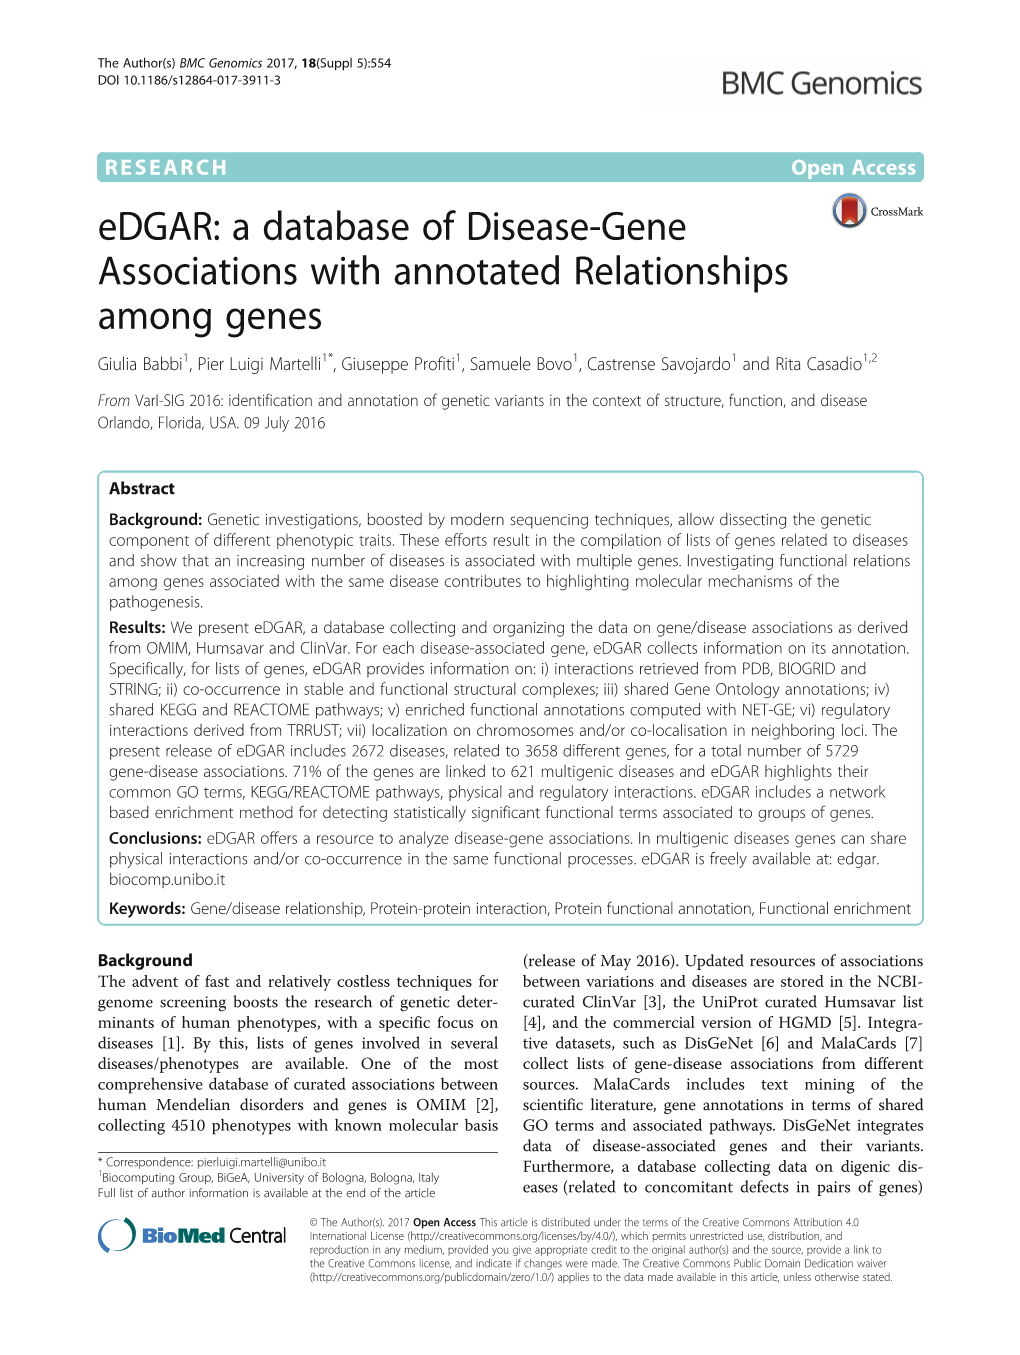 Edgar: a Database of Disease-Gene Associations with Annotated